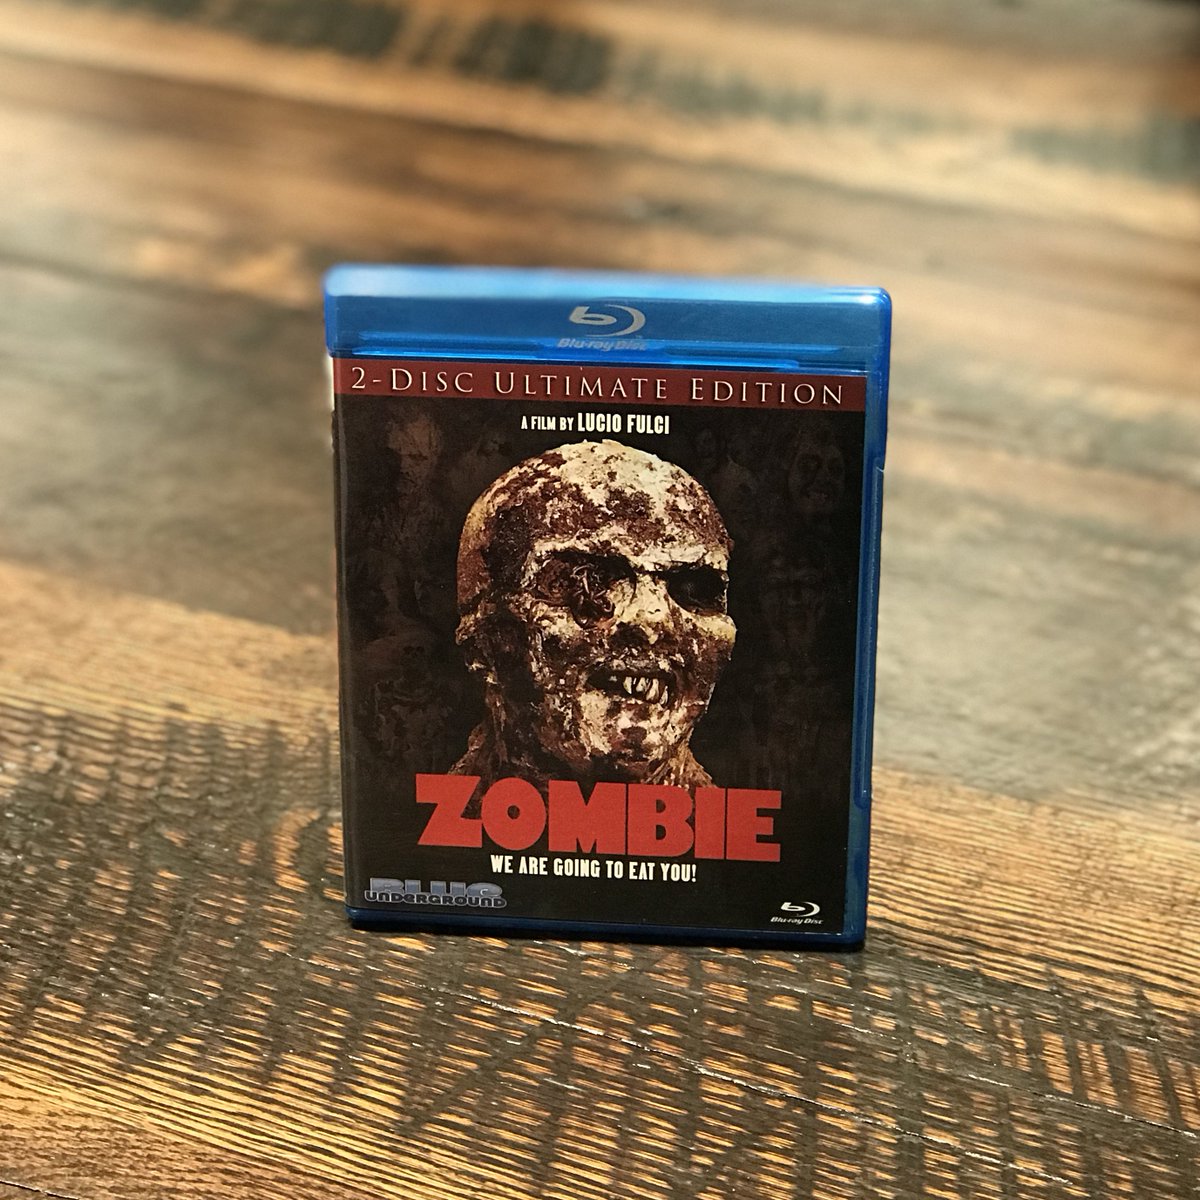 Gun Born On This Day In 1927 Lucio Fulci Sometimes Known As The Godfather Of Gore Brought Us Classics Like The Beyond 1981 And Zombie 1979 If You Don T Know